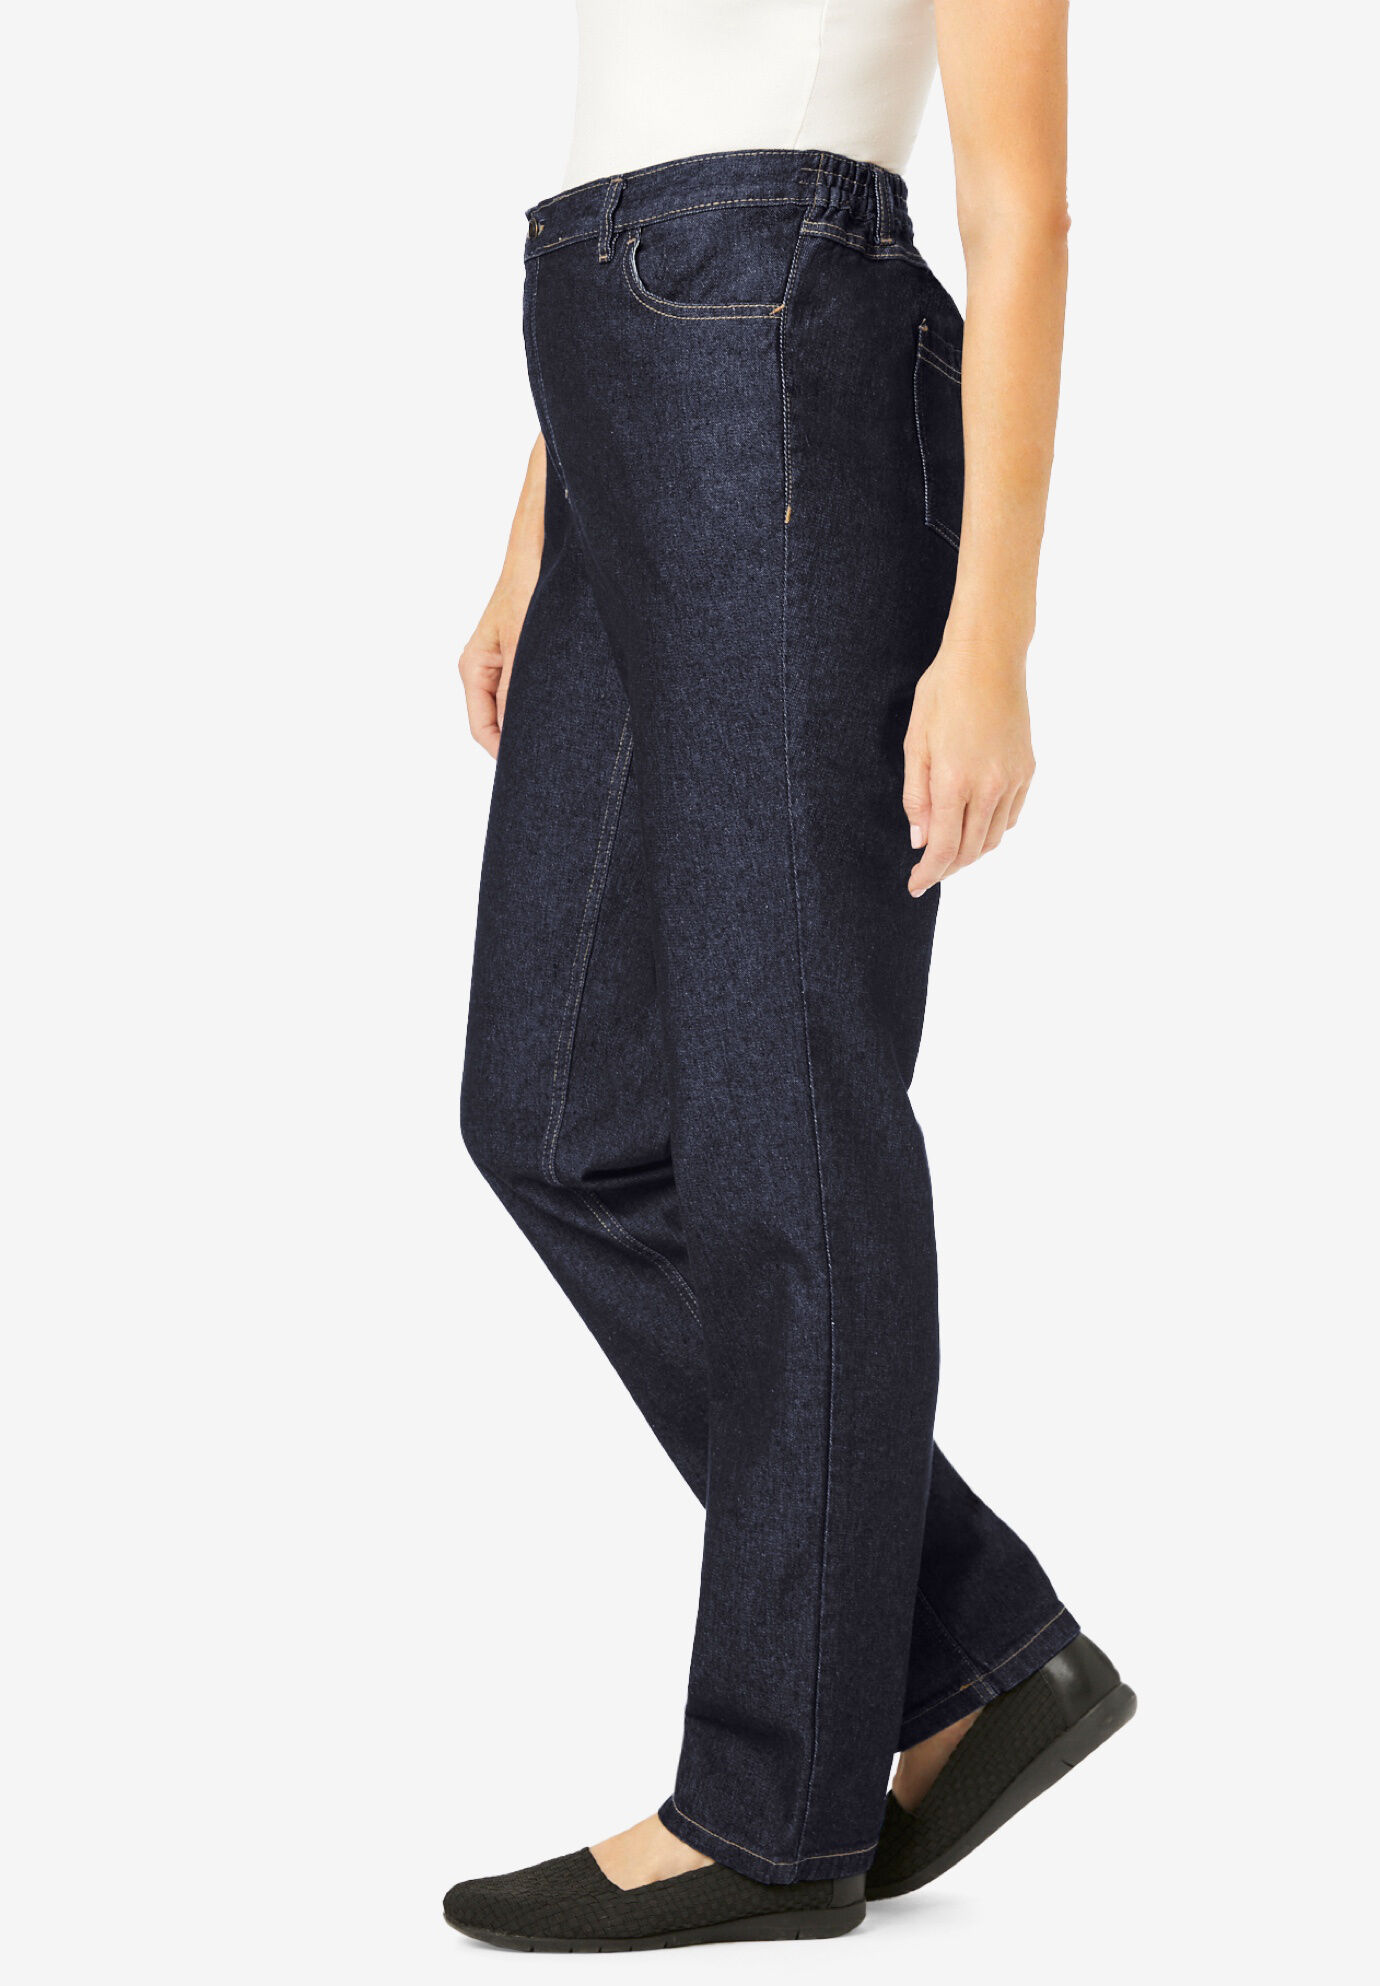 woman within elastic waist jeans